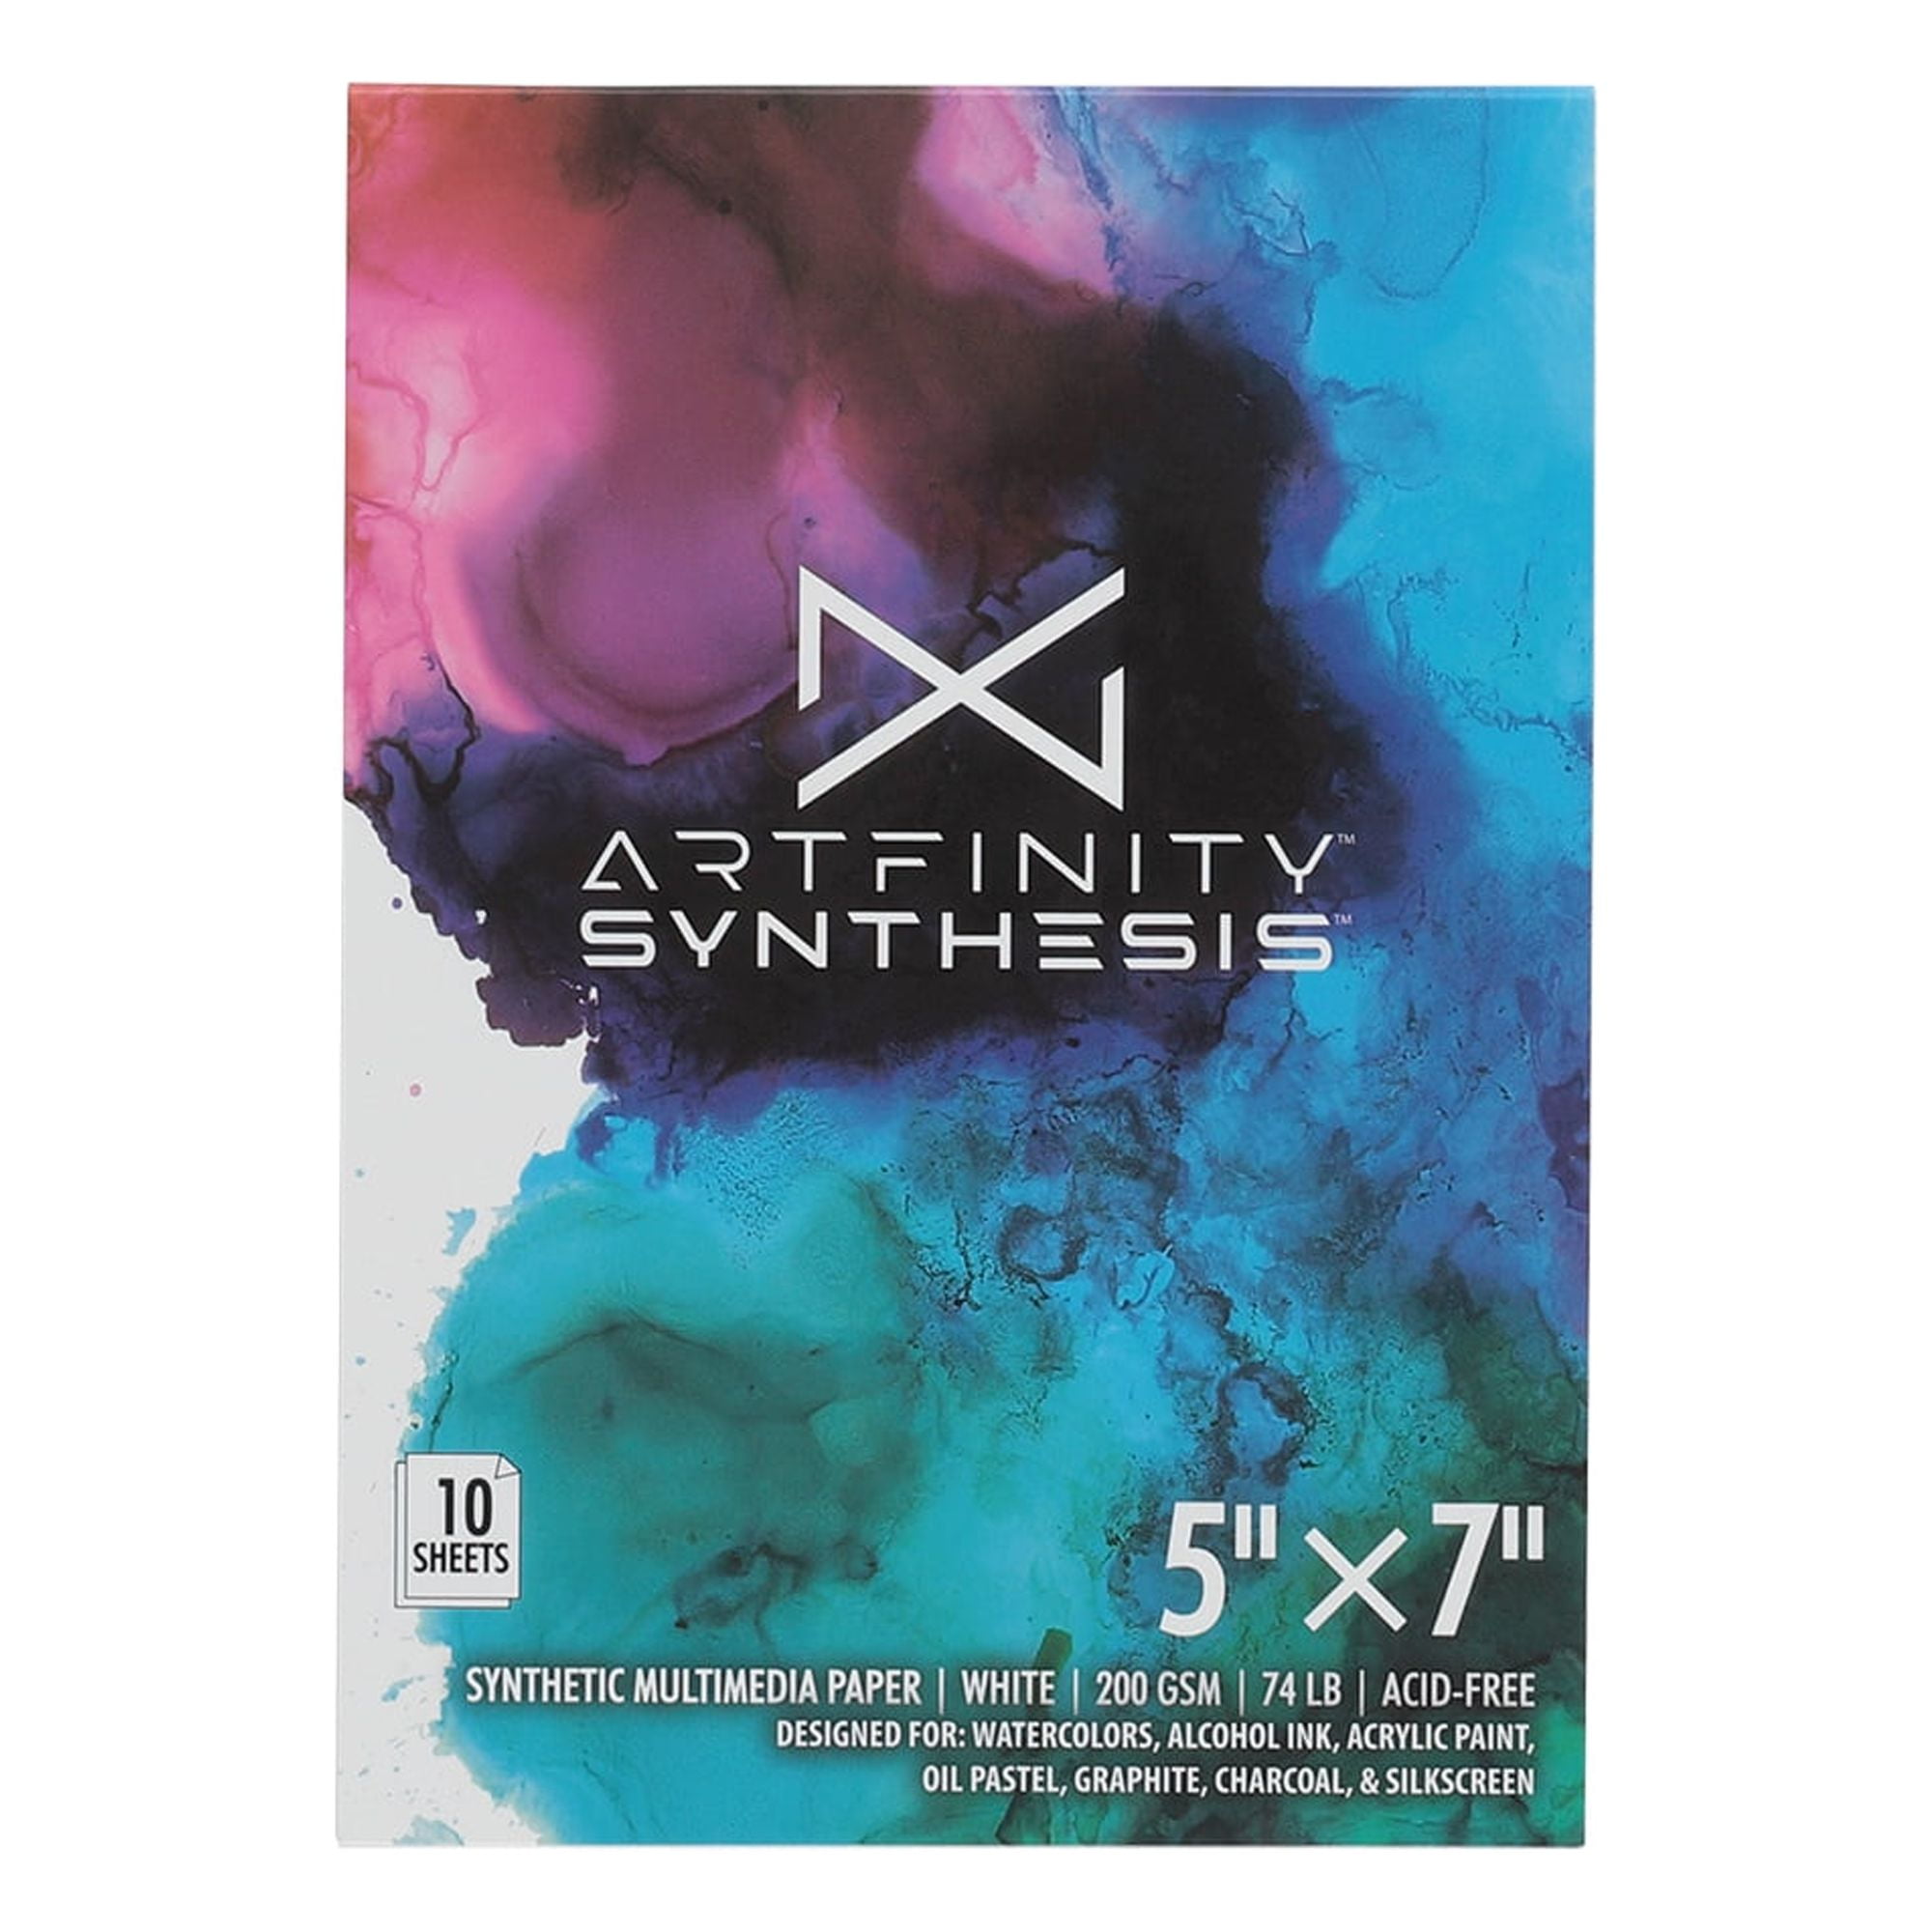 Artfinity Synthesis Watercolor Paper Pads - White 74lb., 200gsm Synthetic  Paper for Painting, Sketching, and More! - 11x14